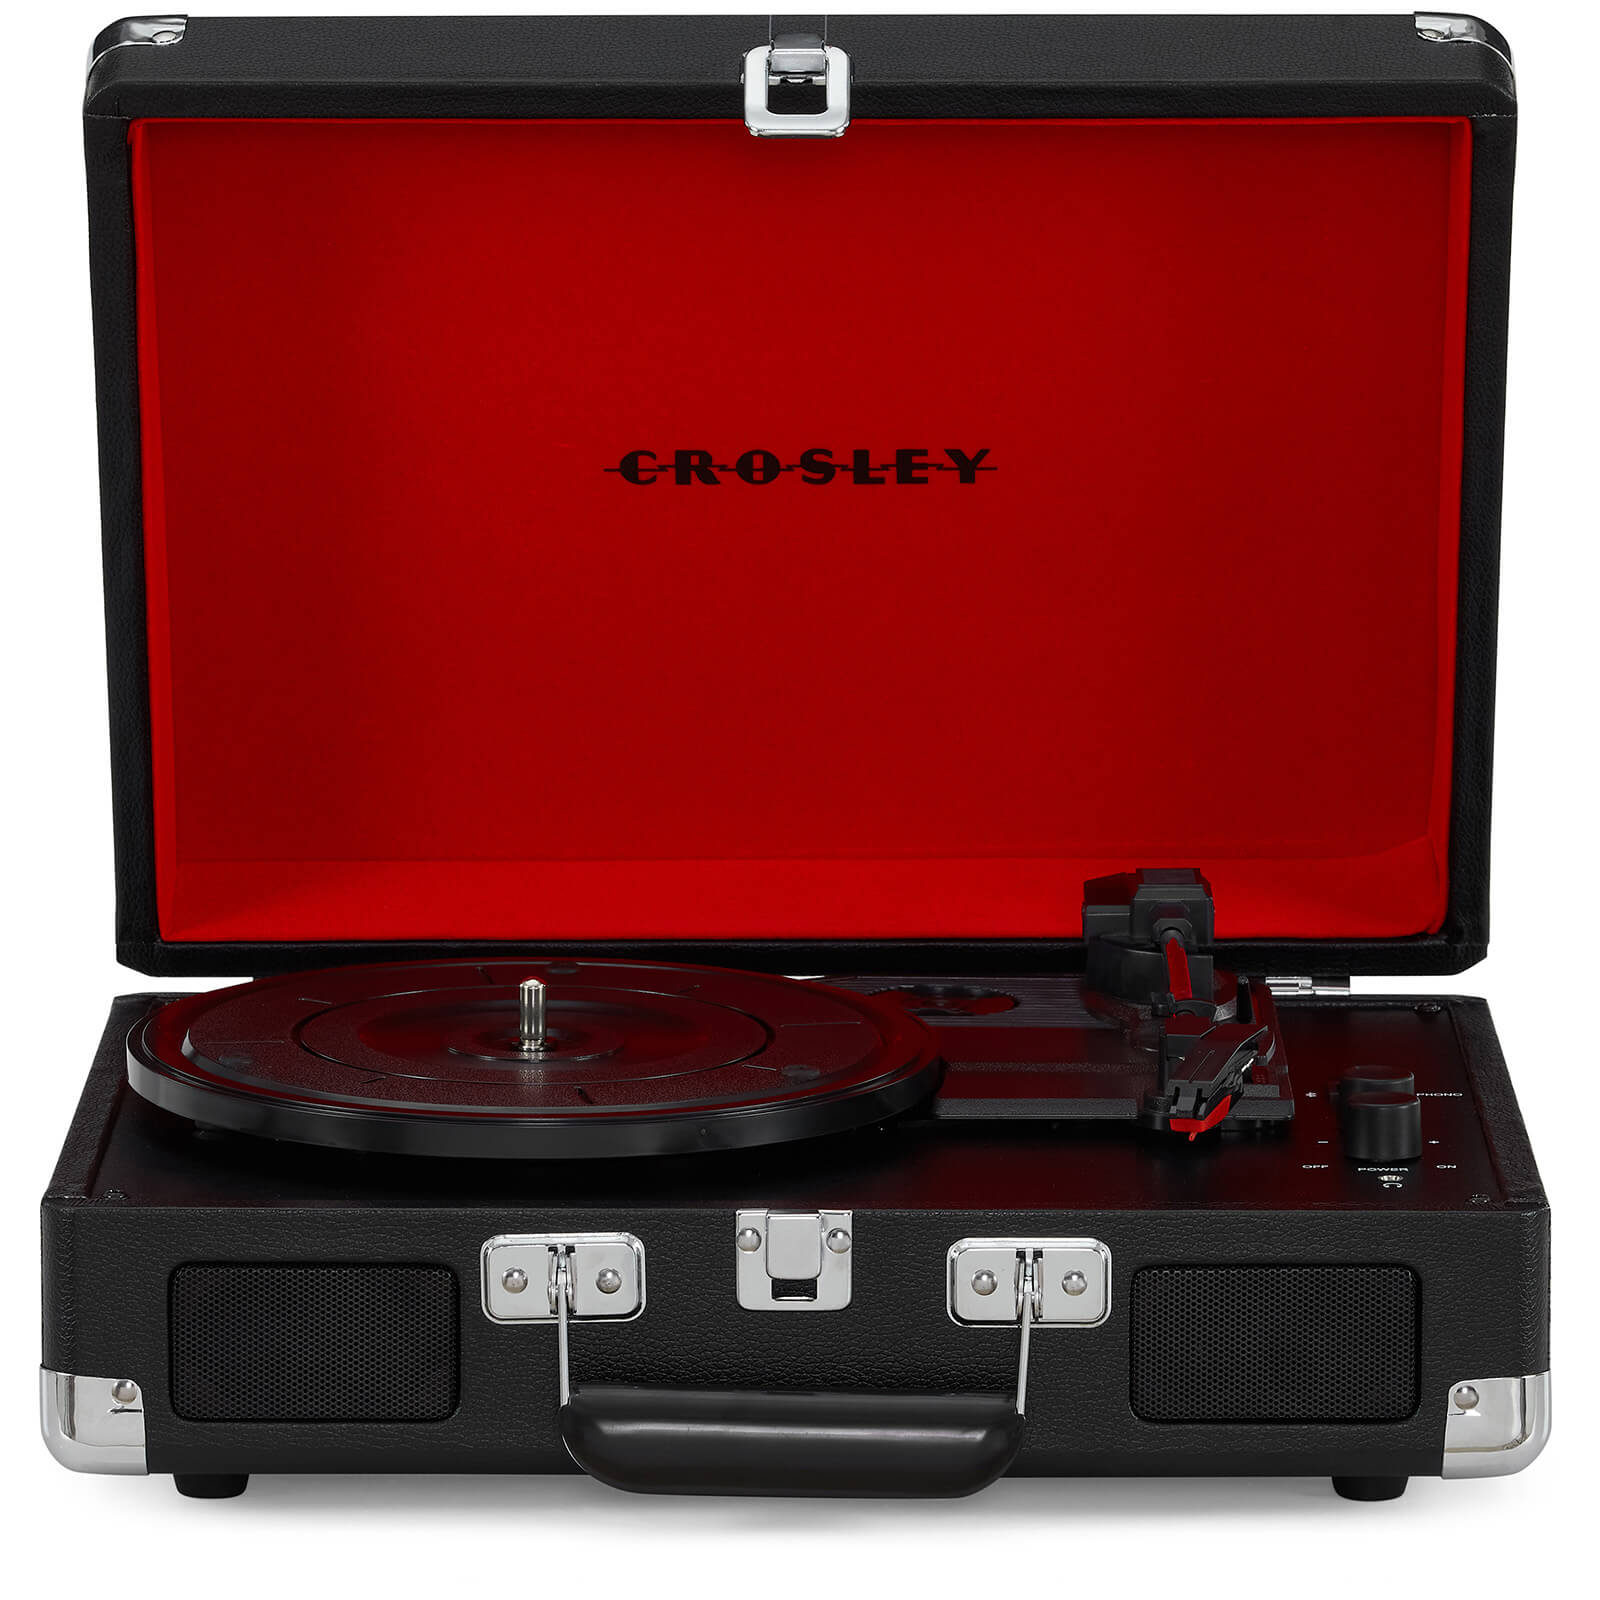 Cruiser Plus Deluxe Portable Turntable - With Bluetooth Output - Black